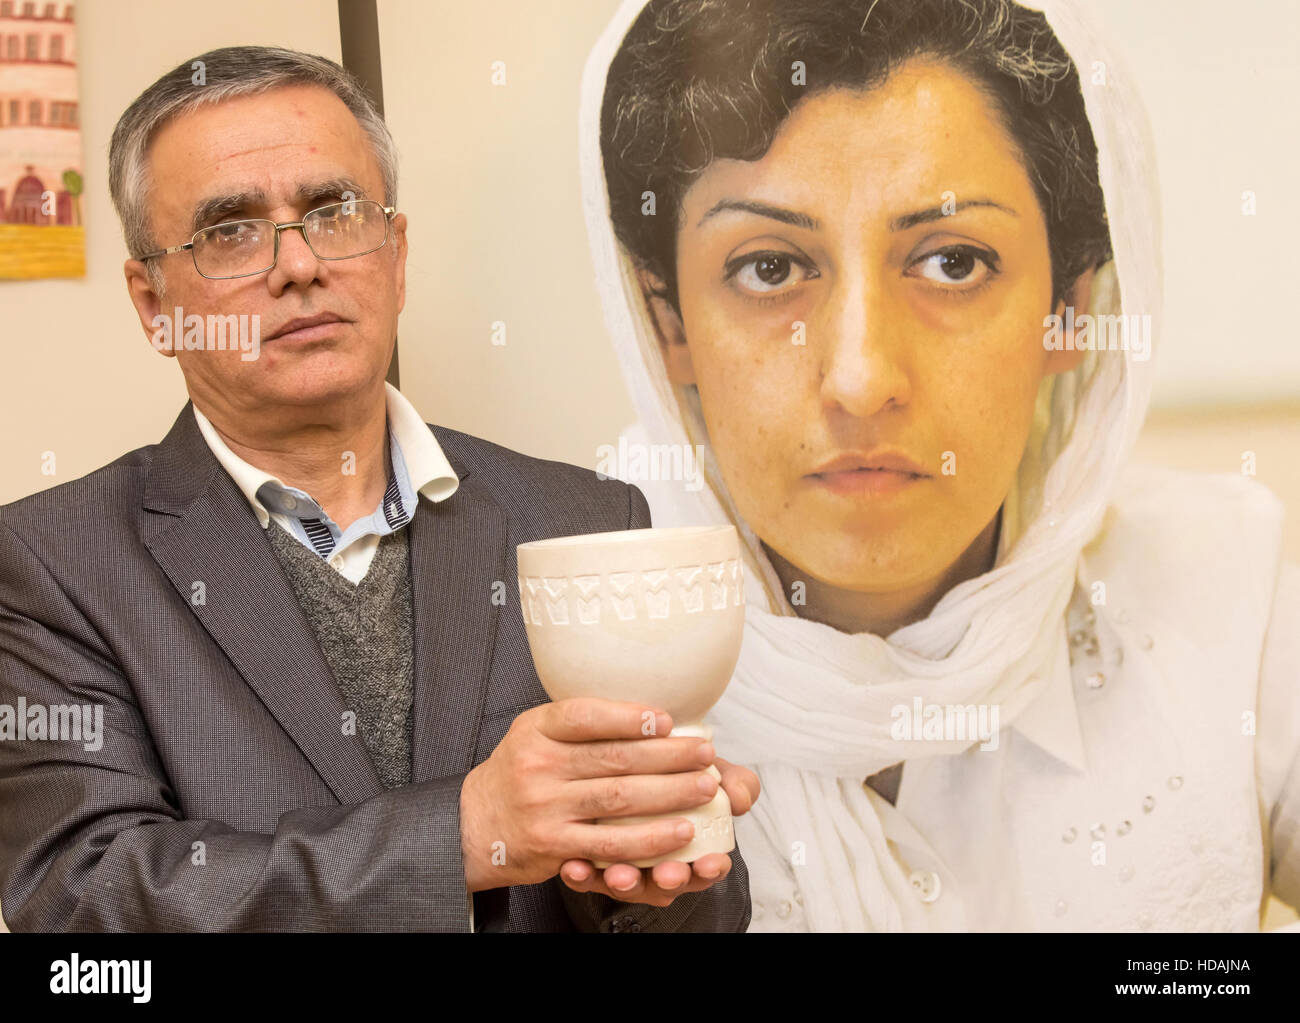 Weimar, Germany. 10th Dec, 2016. Taghi Rahmani holds the Weimarer Menschenrechtspreis (Weimar Human Rights Award) in place of his wife Narges Mohammadi from Iran, in Weimar, Germany, 10 December 2016. Narges Mohammadi was vice president of the now banned human rights organisation Defenders of Human Rights and is currently serving a jail sentence. Photo: Arifoto Ug/Michael Reichel/dpa/Alamy Live News Stock Photo